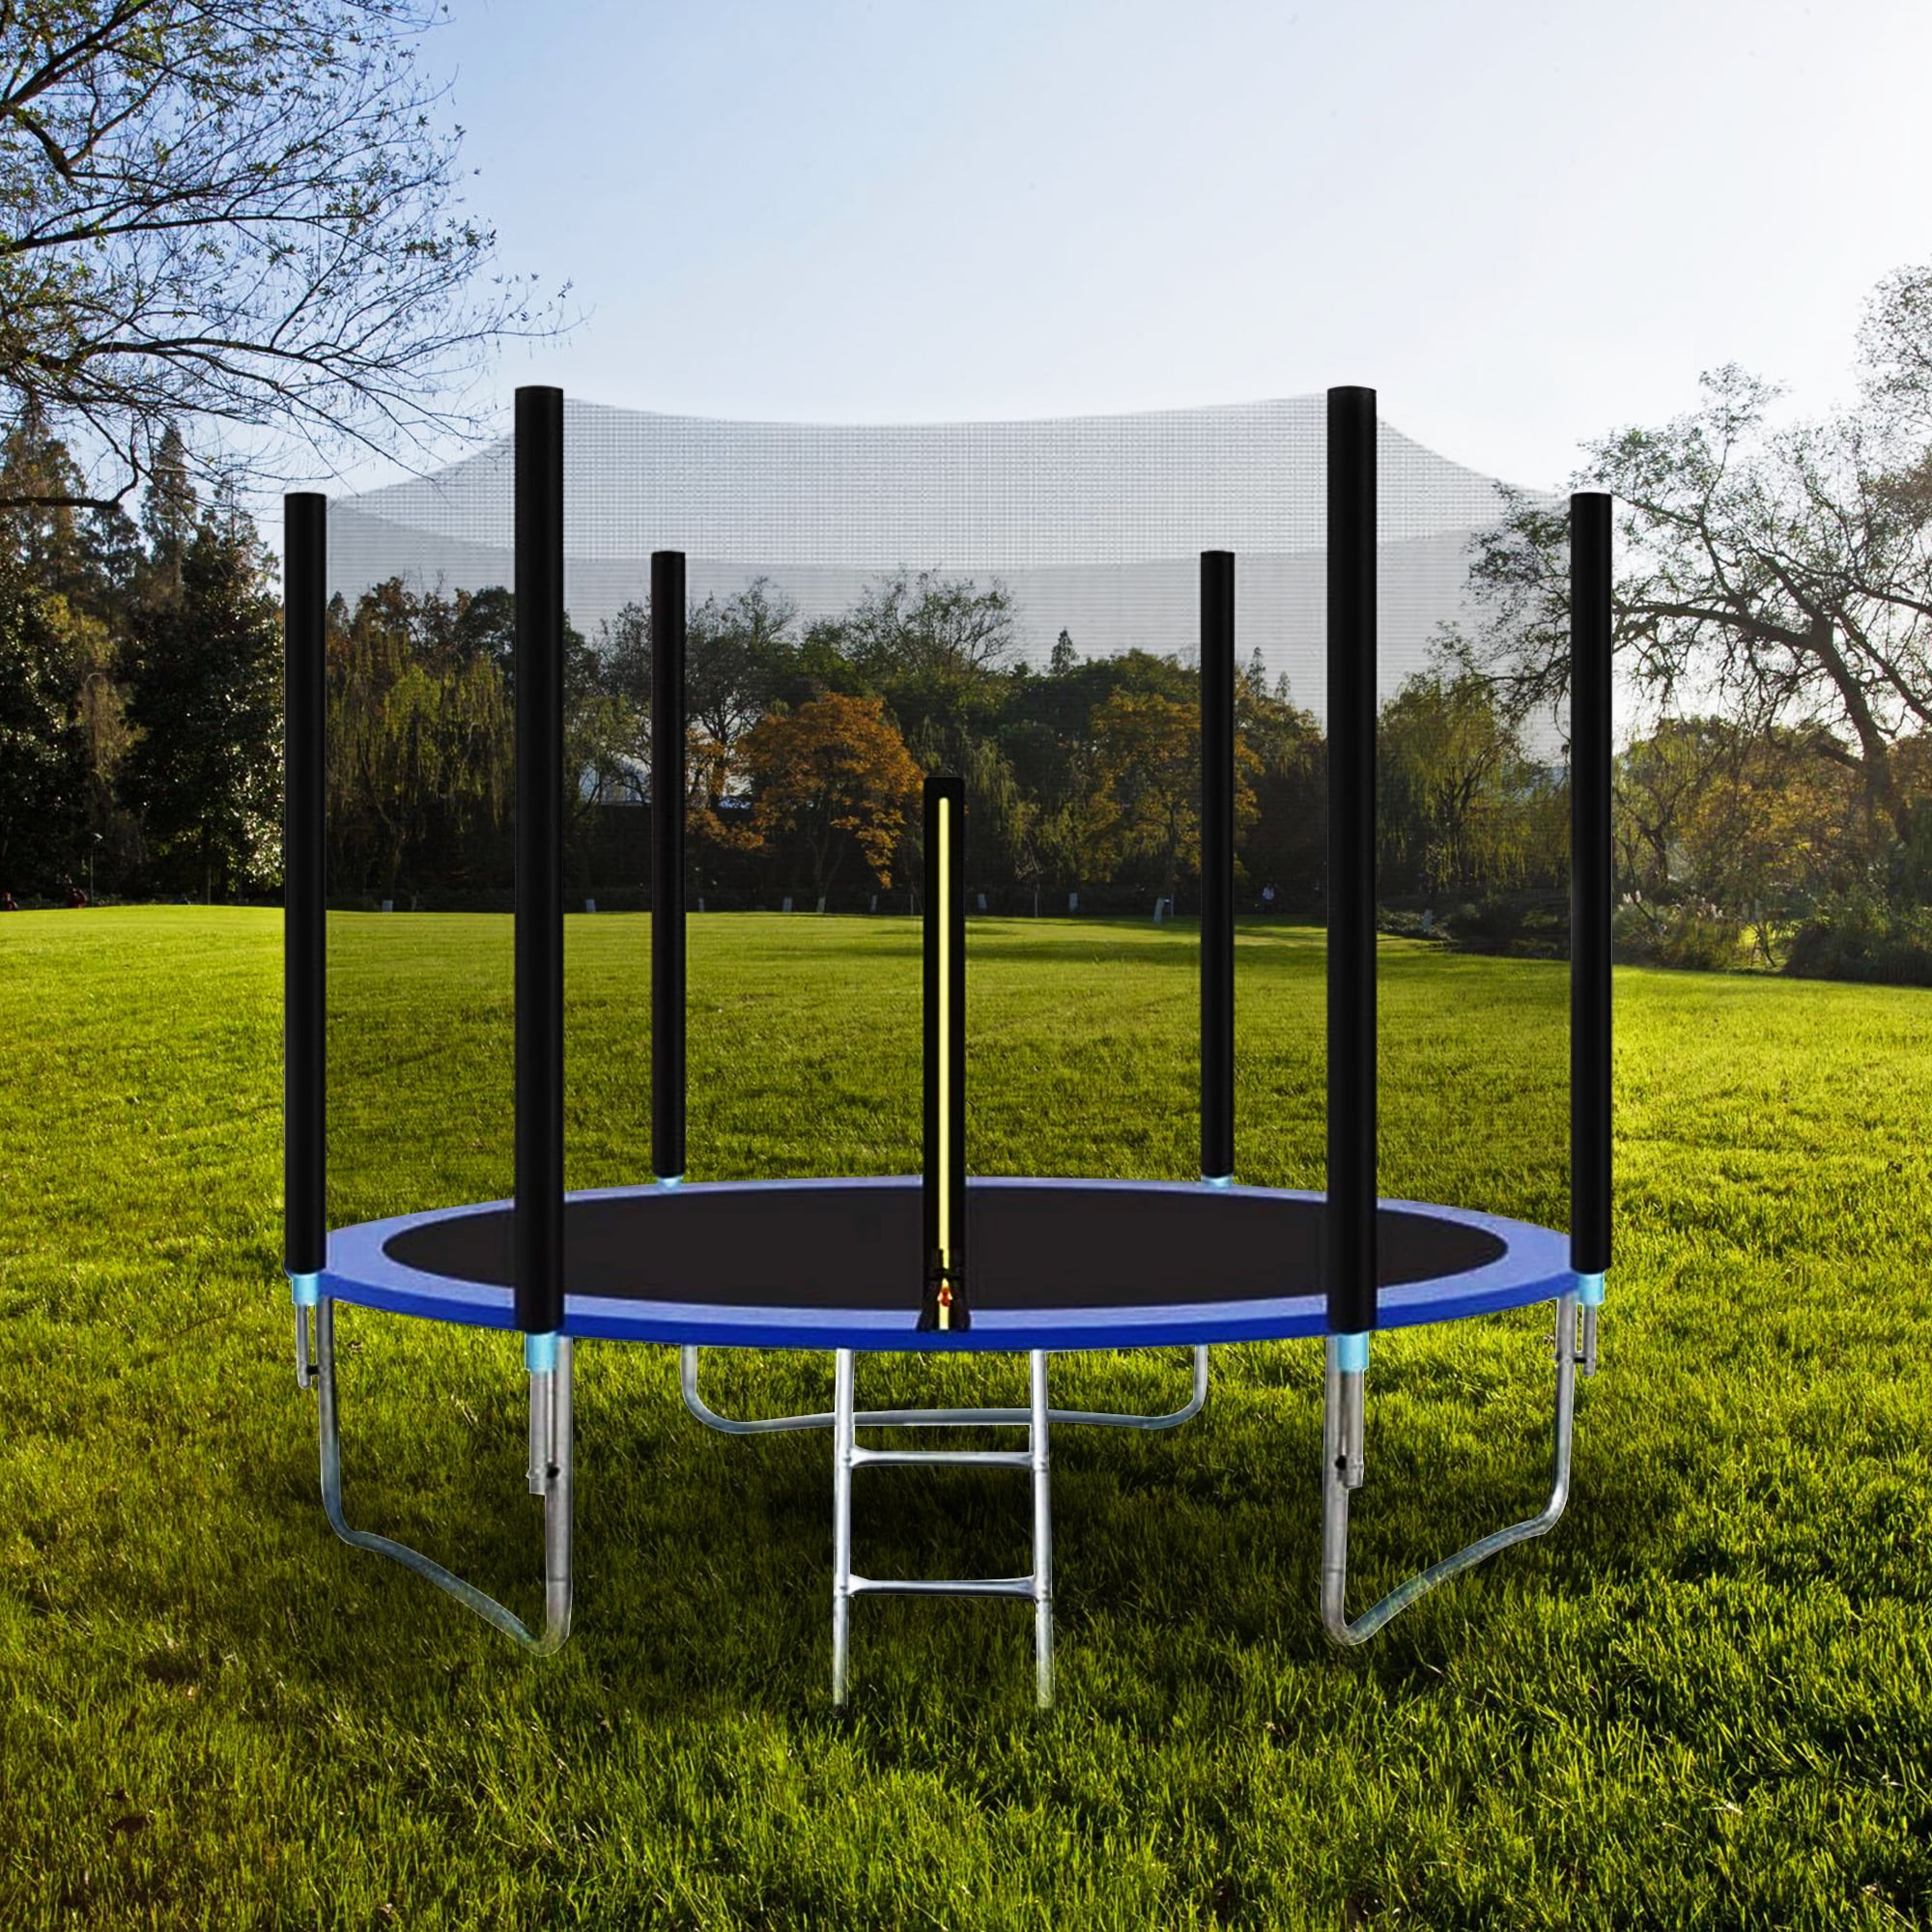 8 FT Outdoor Trampoline for Backyard, Outdoor Trampoline with Safety Enclosure Net, Steel Tube, Circular Trampolines for Adults/Kids, Family Jumping and Ladder, Kids Round Trampoline, Q17862